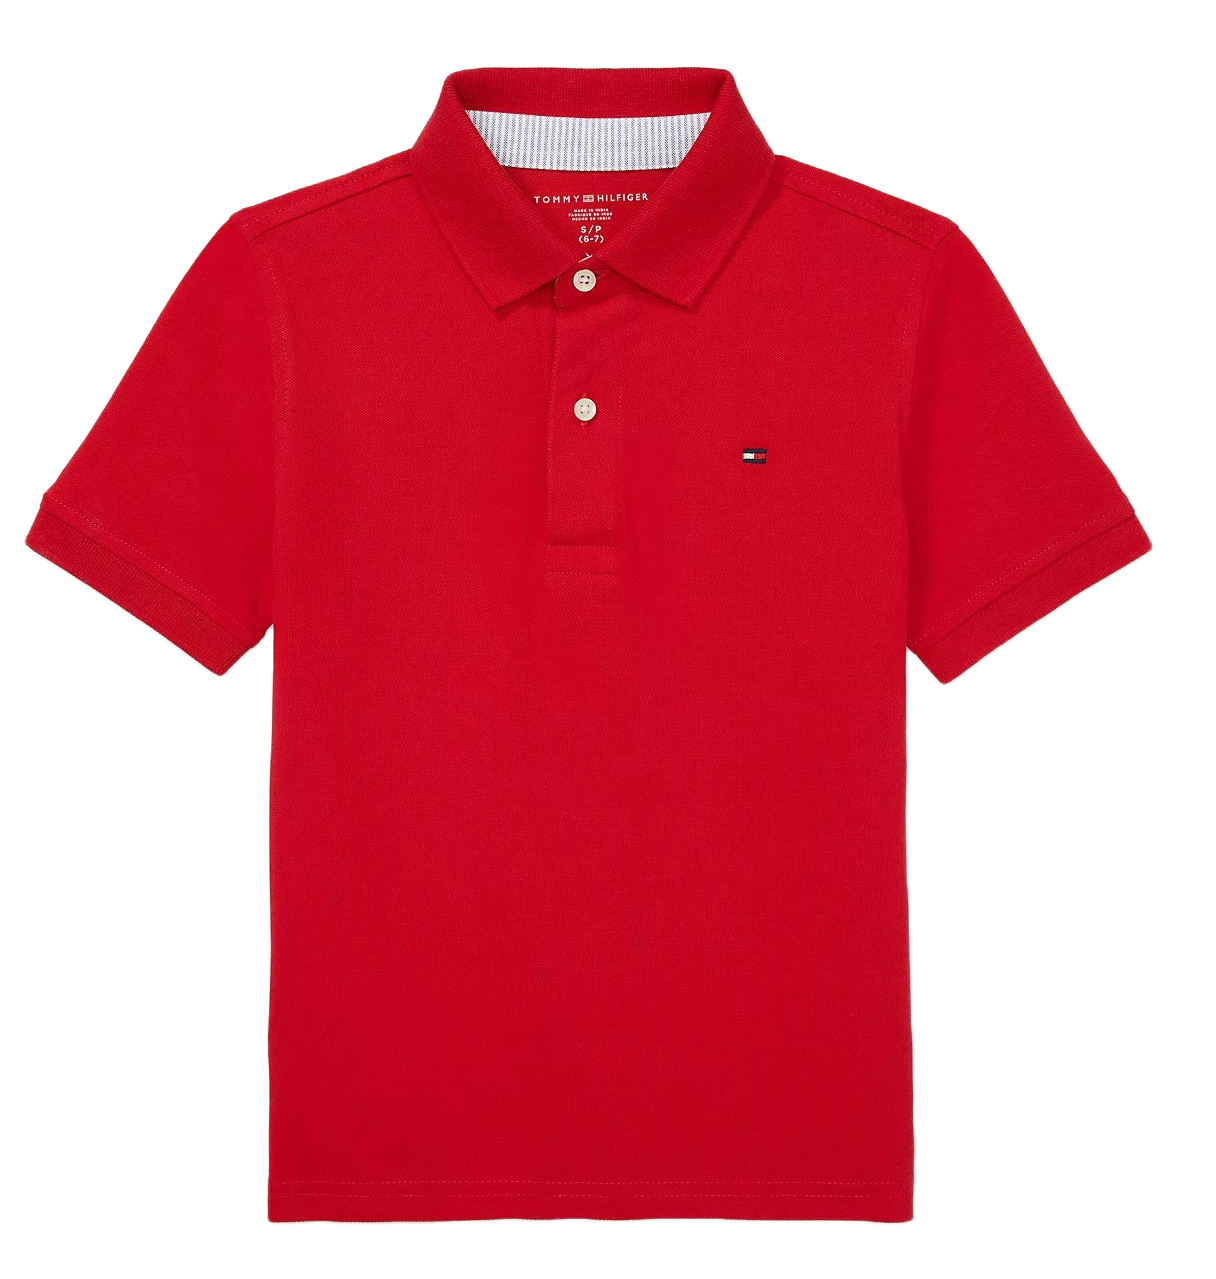 Polo Tommy Hilfiger Toddler - basic red